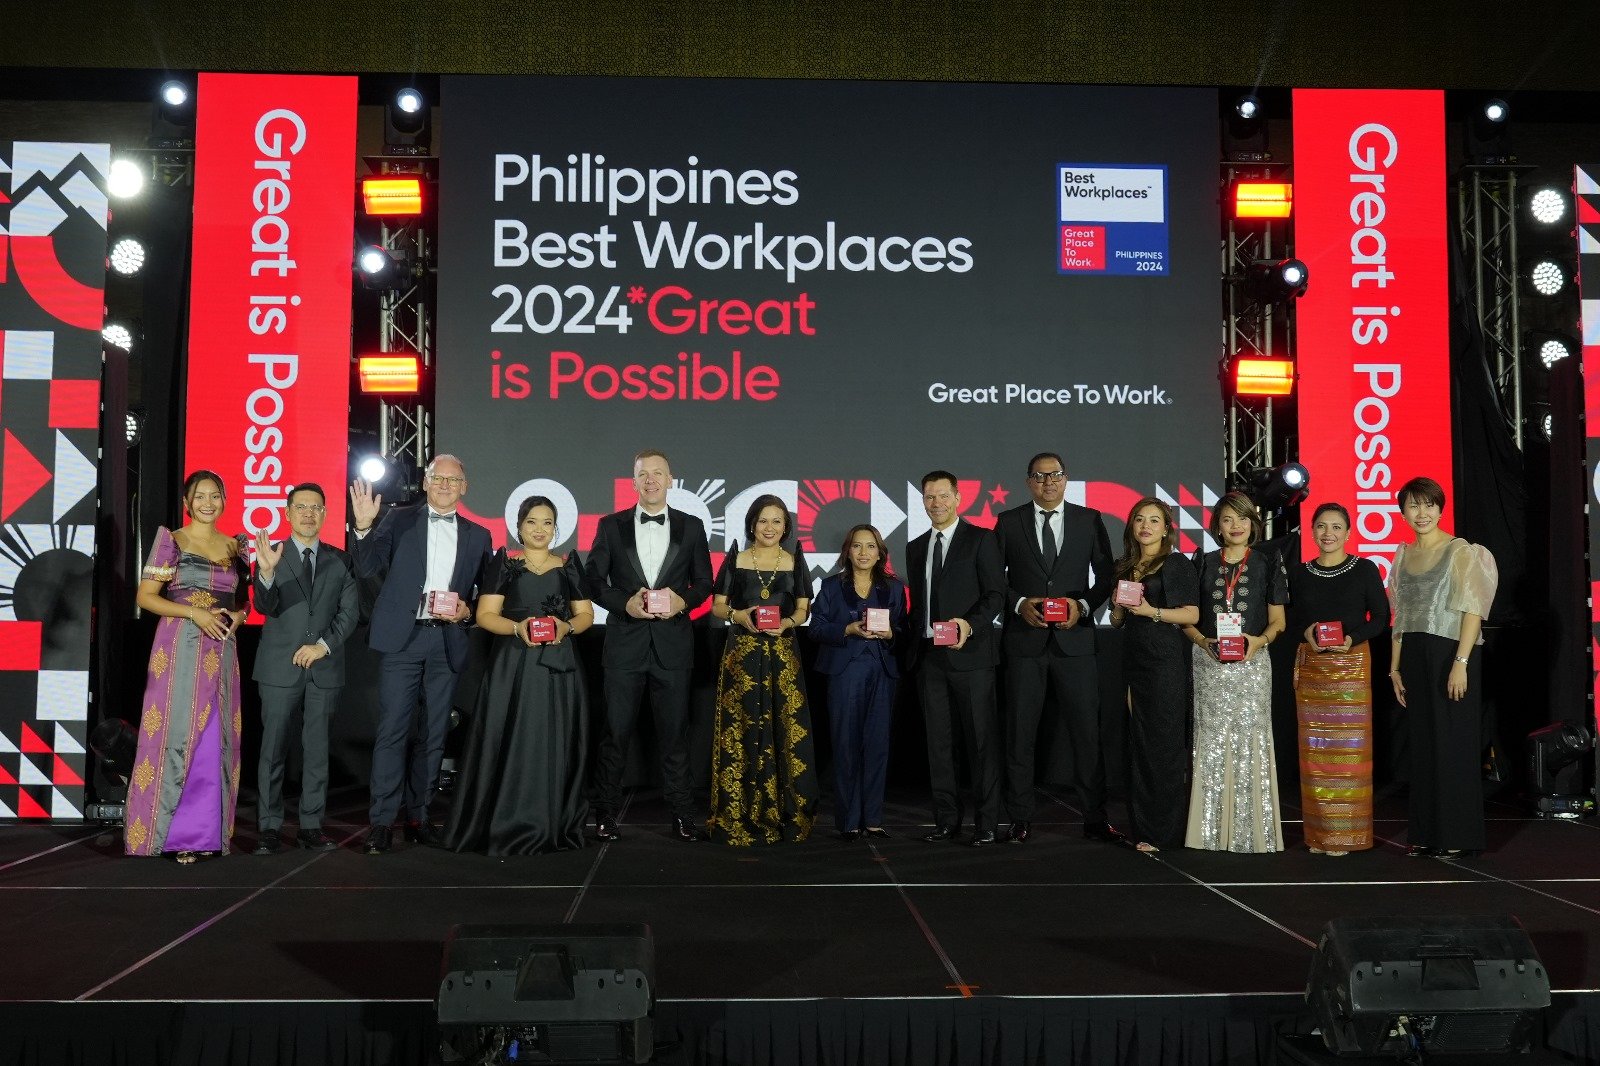 Top 35 Best Workplaces TM in Philippines List Revealed Showing Great is Possible Amidst Evolving Workforce Landscape